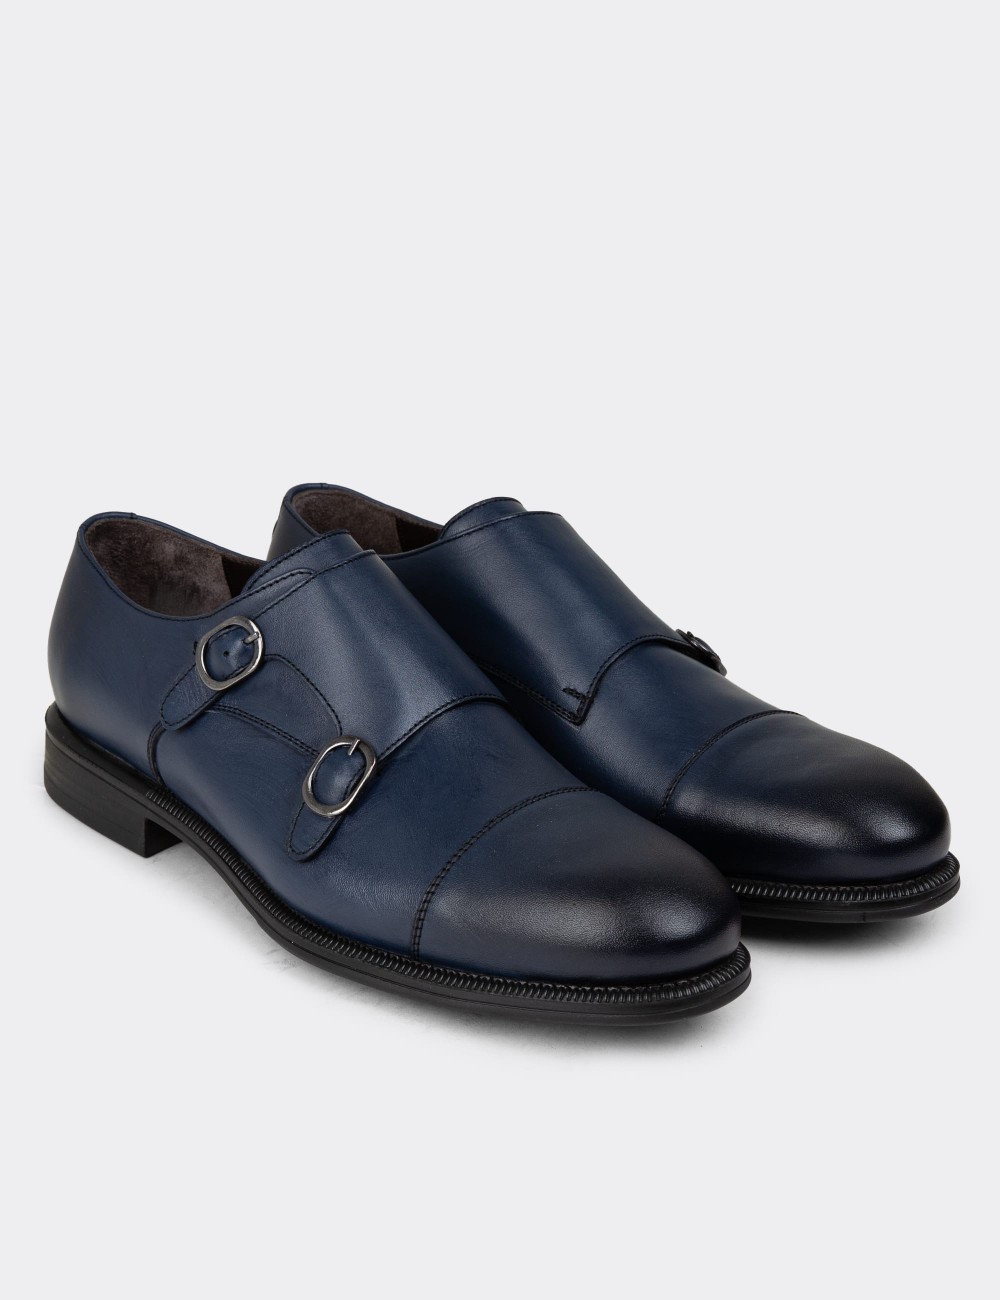 Navy Blue Leather Double Monk-Strap Classic Shoes - 01838MLCVC01